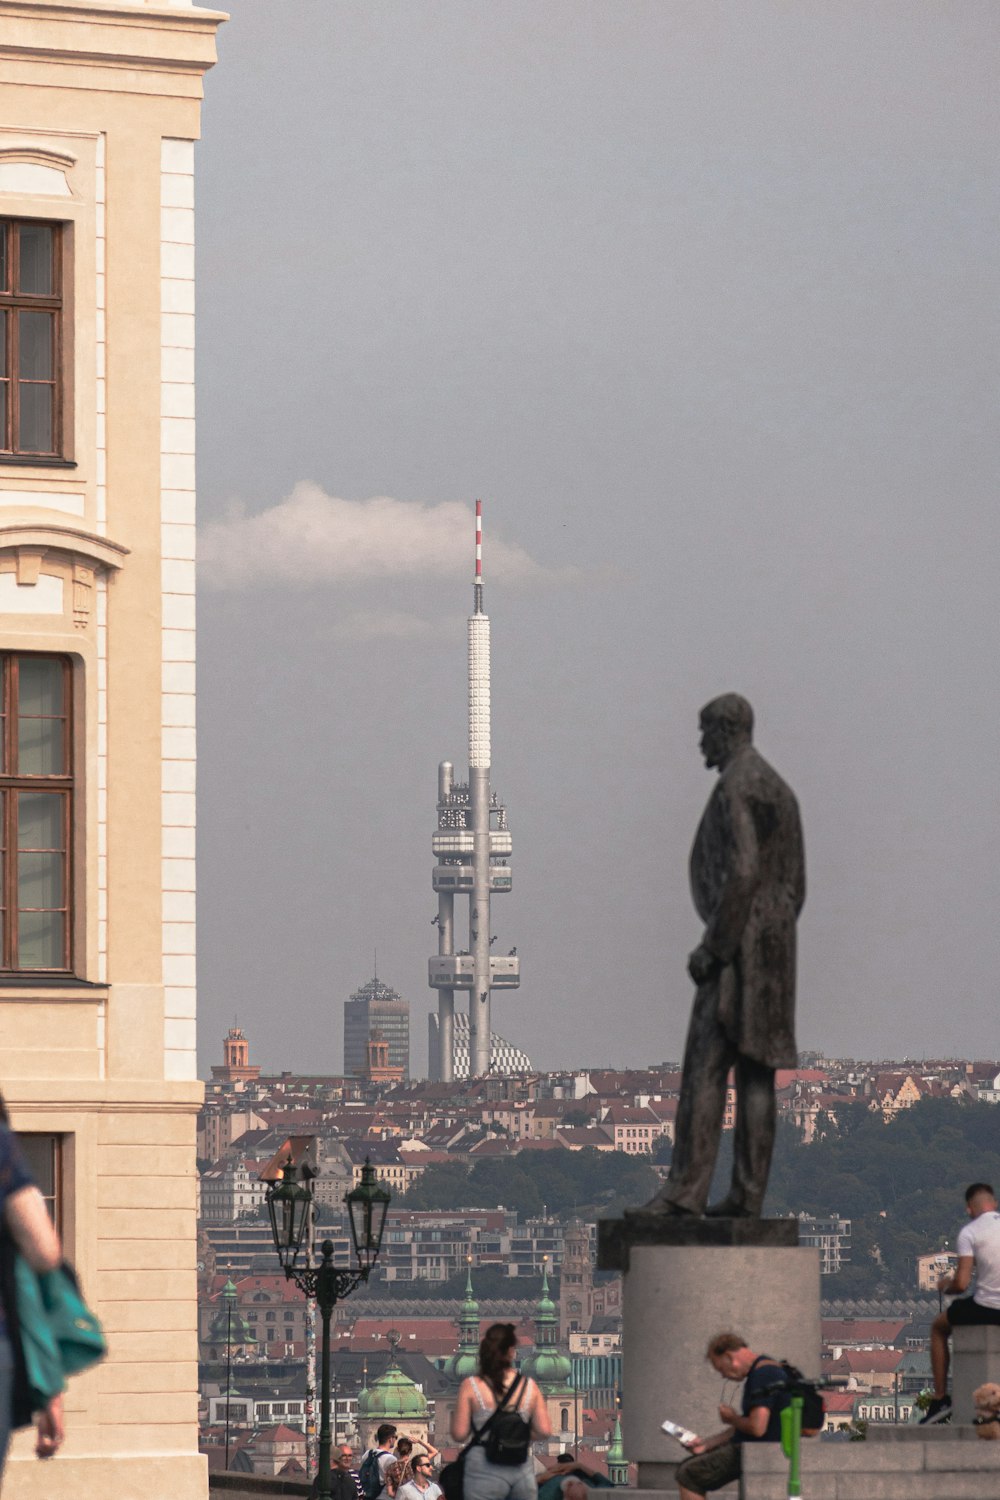 a statue of a person in front of a city